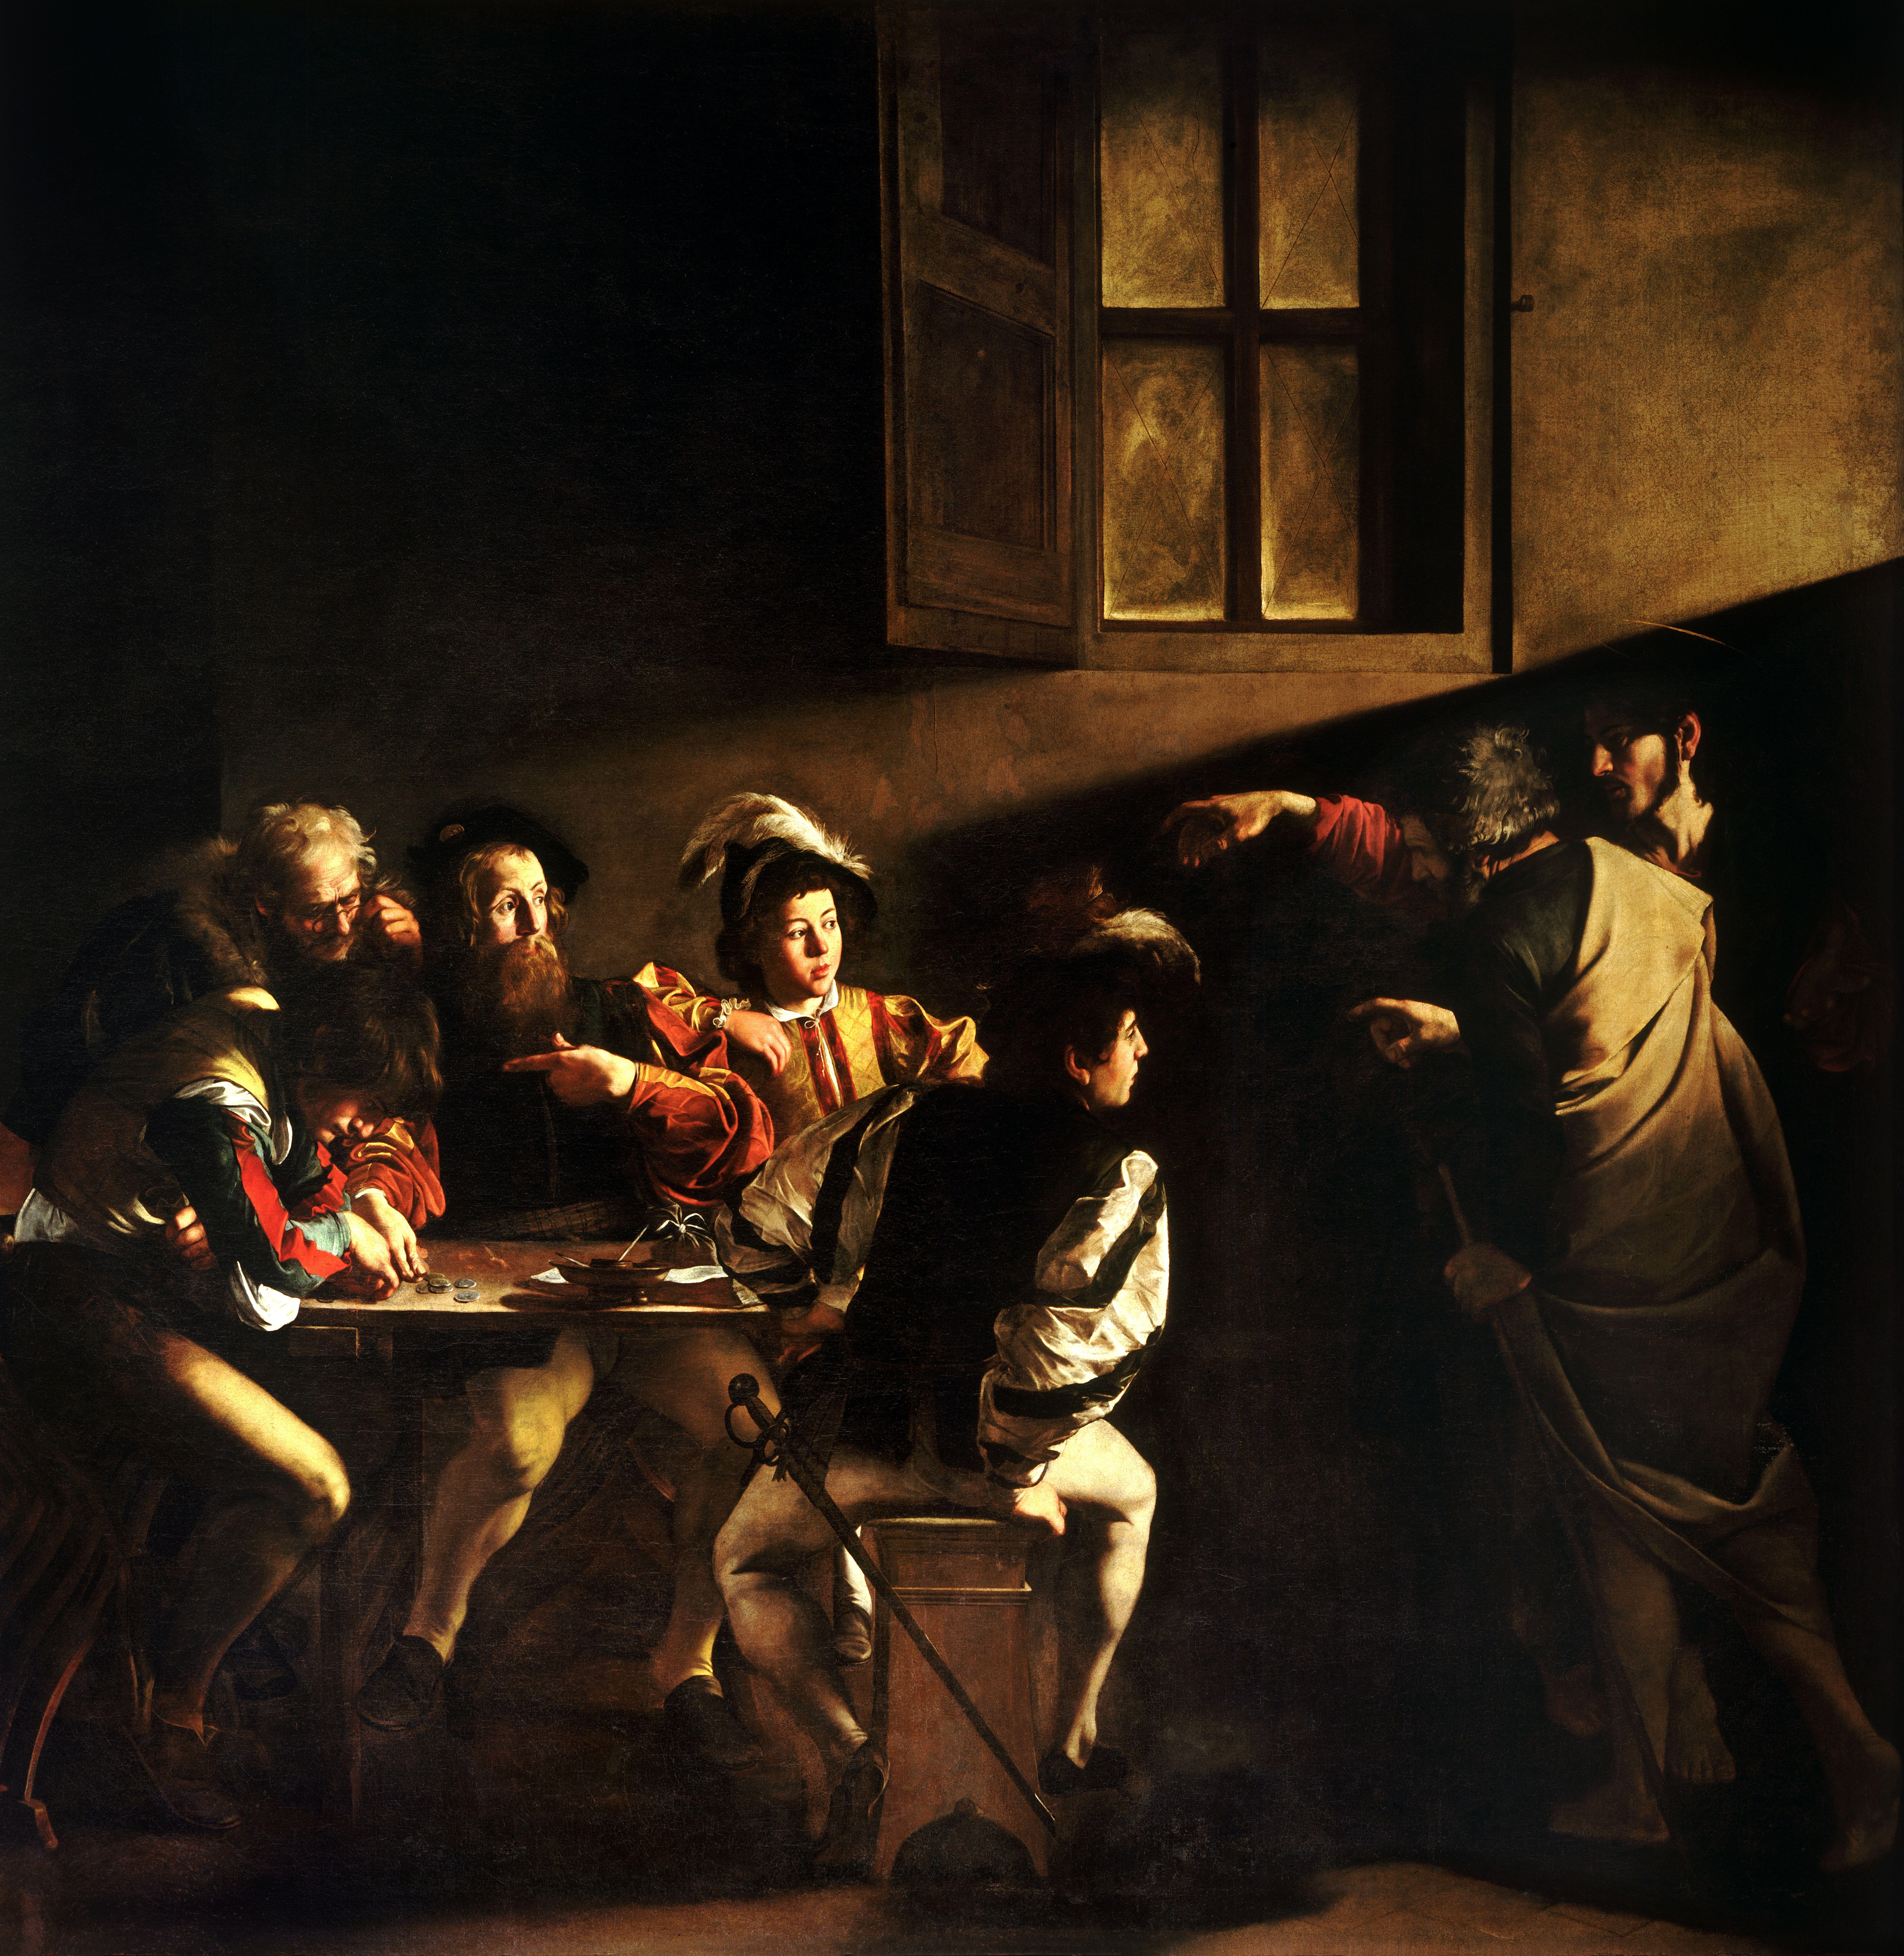 "The Calling of St. Matthew," by Caravaggio